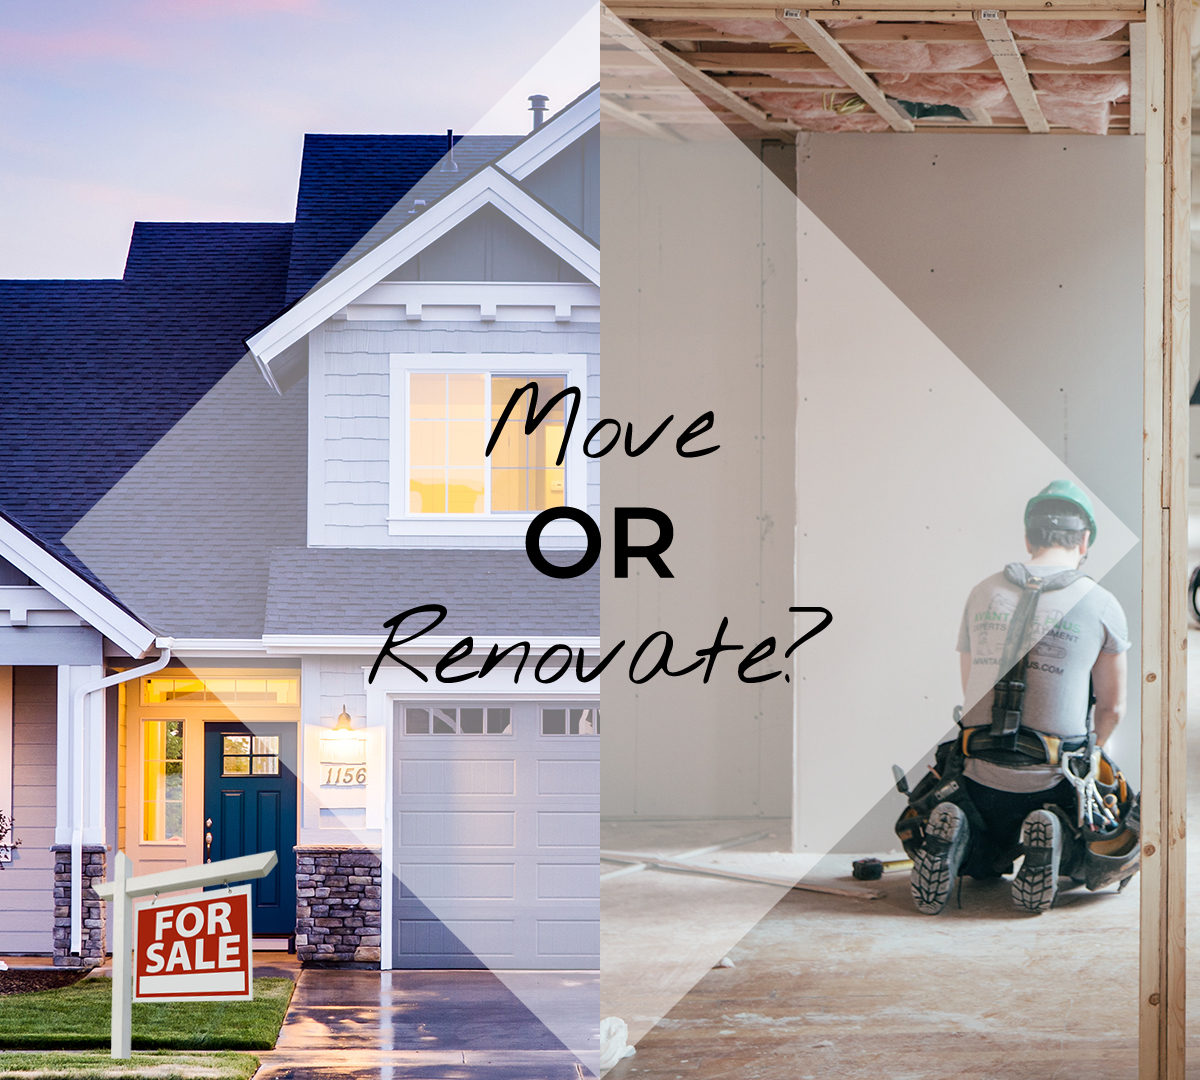 Renovate or Move? How to decide